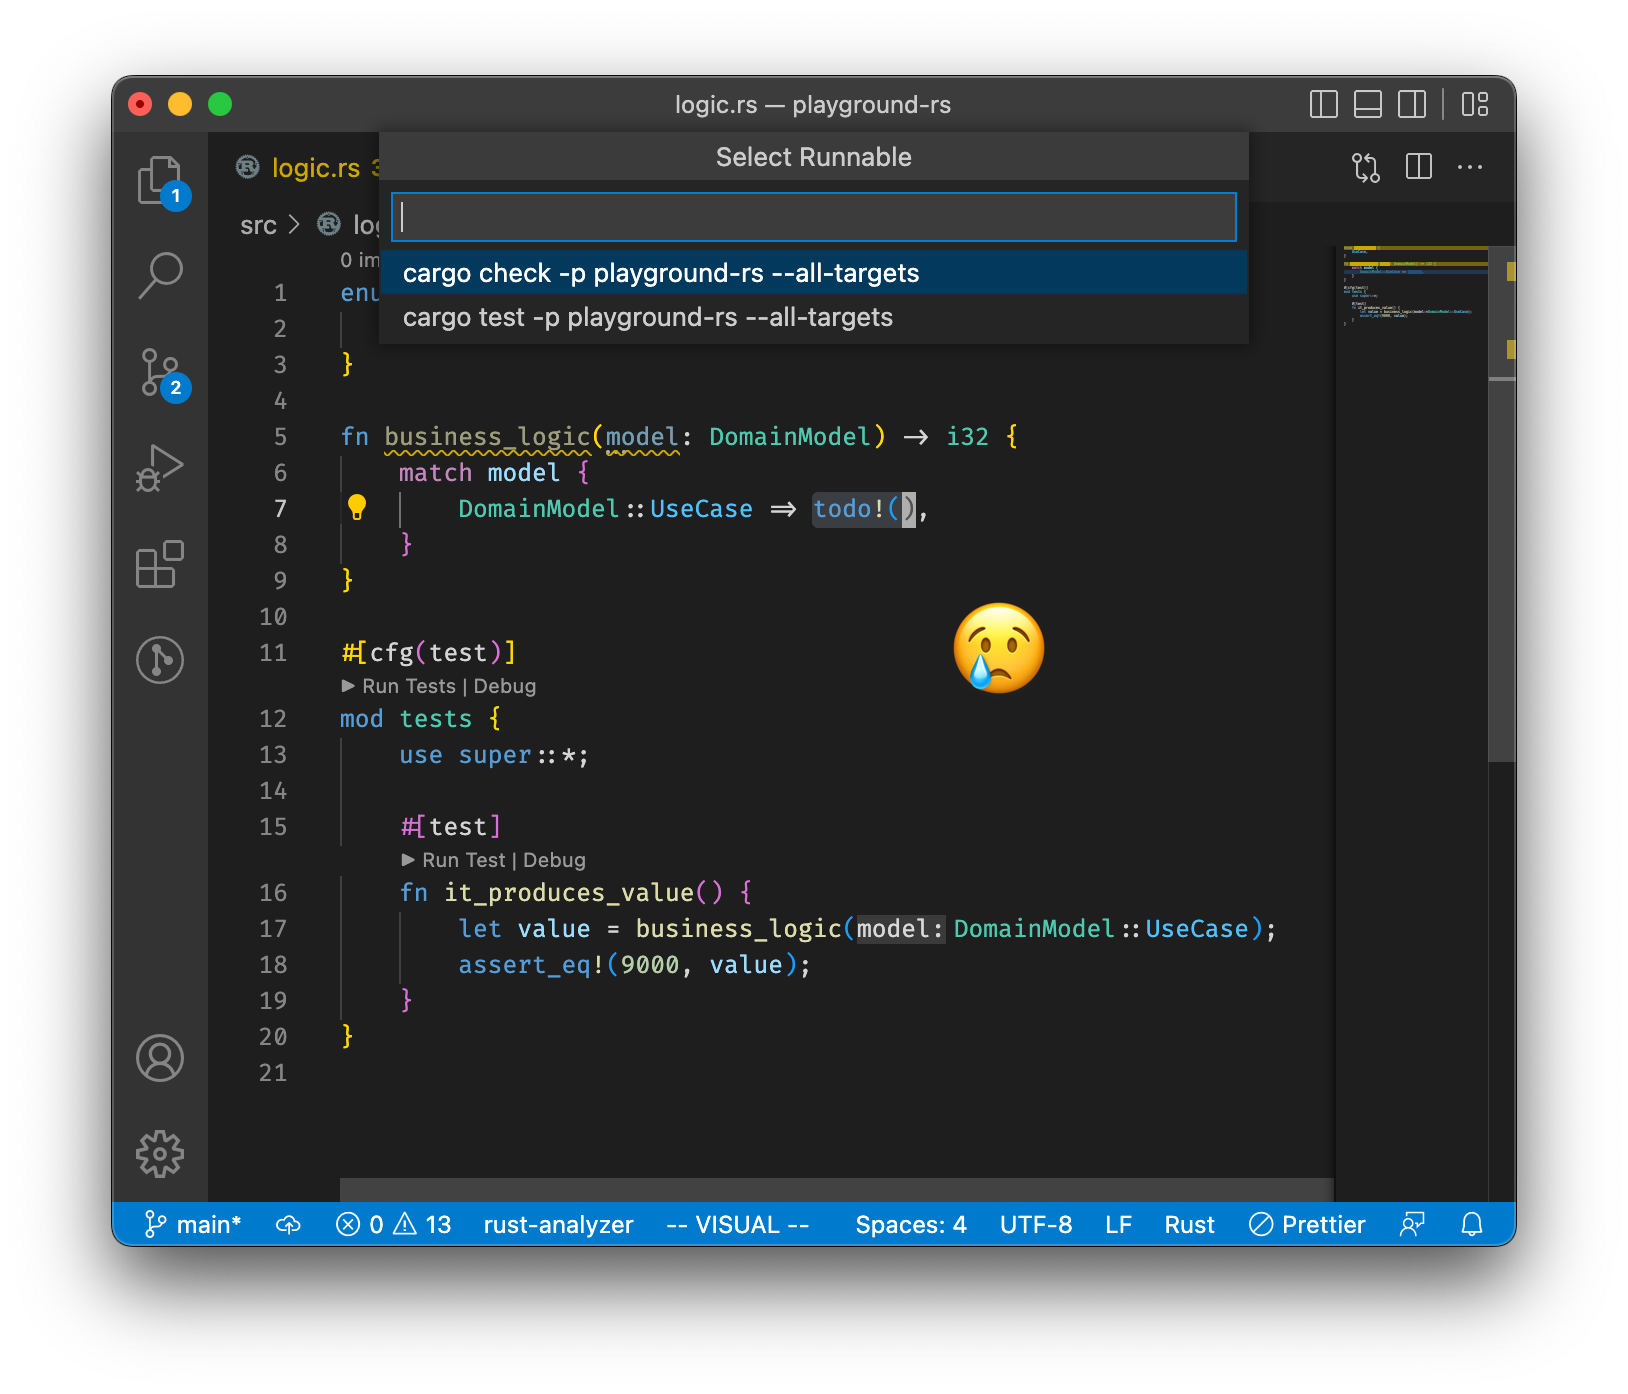 A screenshot of VSCode, with the "Run" menu open. The cursor is within the implementation of a function called "business_logic". There is a test module defined in the file, but the run menu is not showing an option to run it. There is a sad face emoji superimposed on the image.